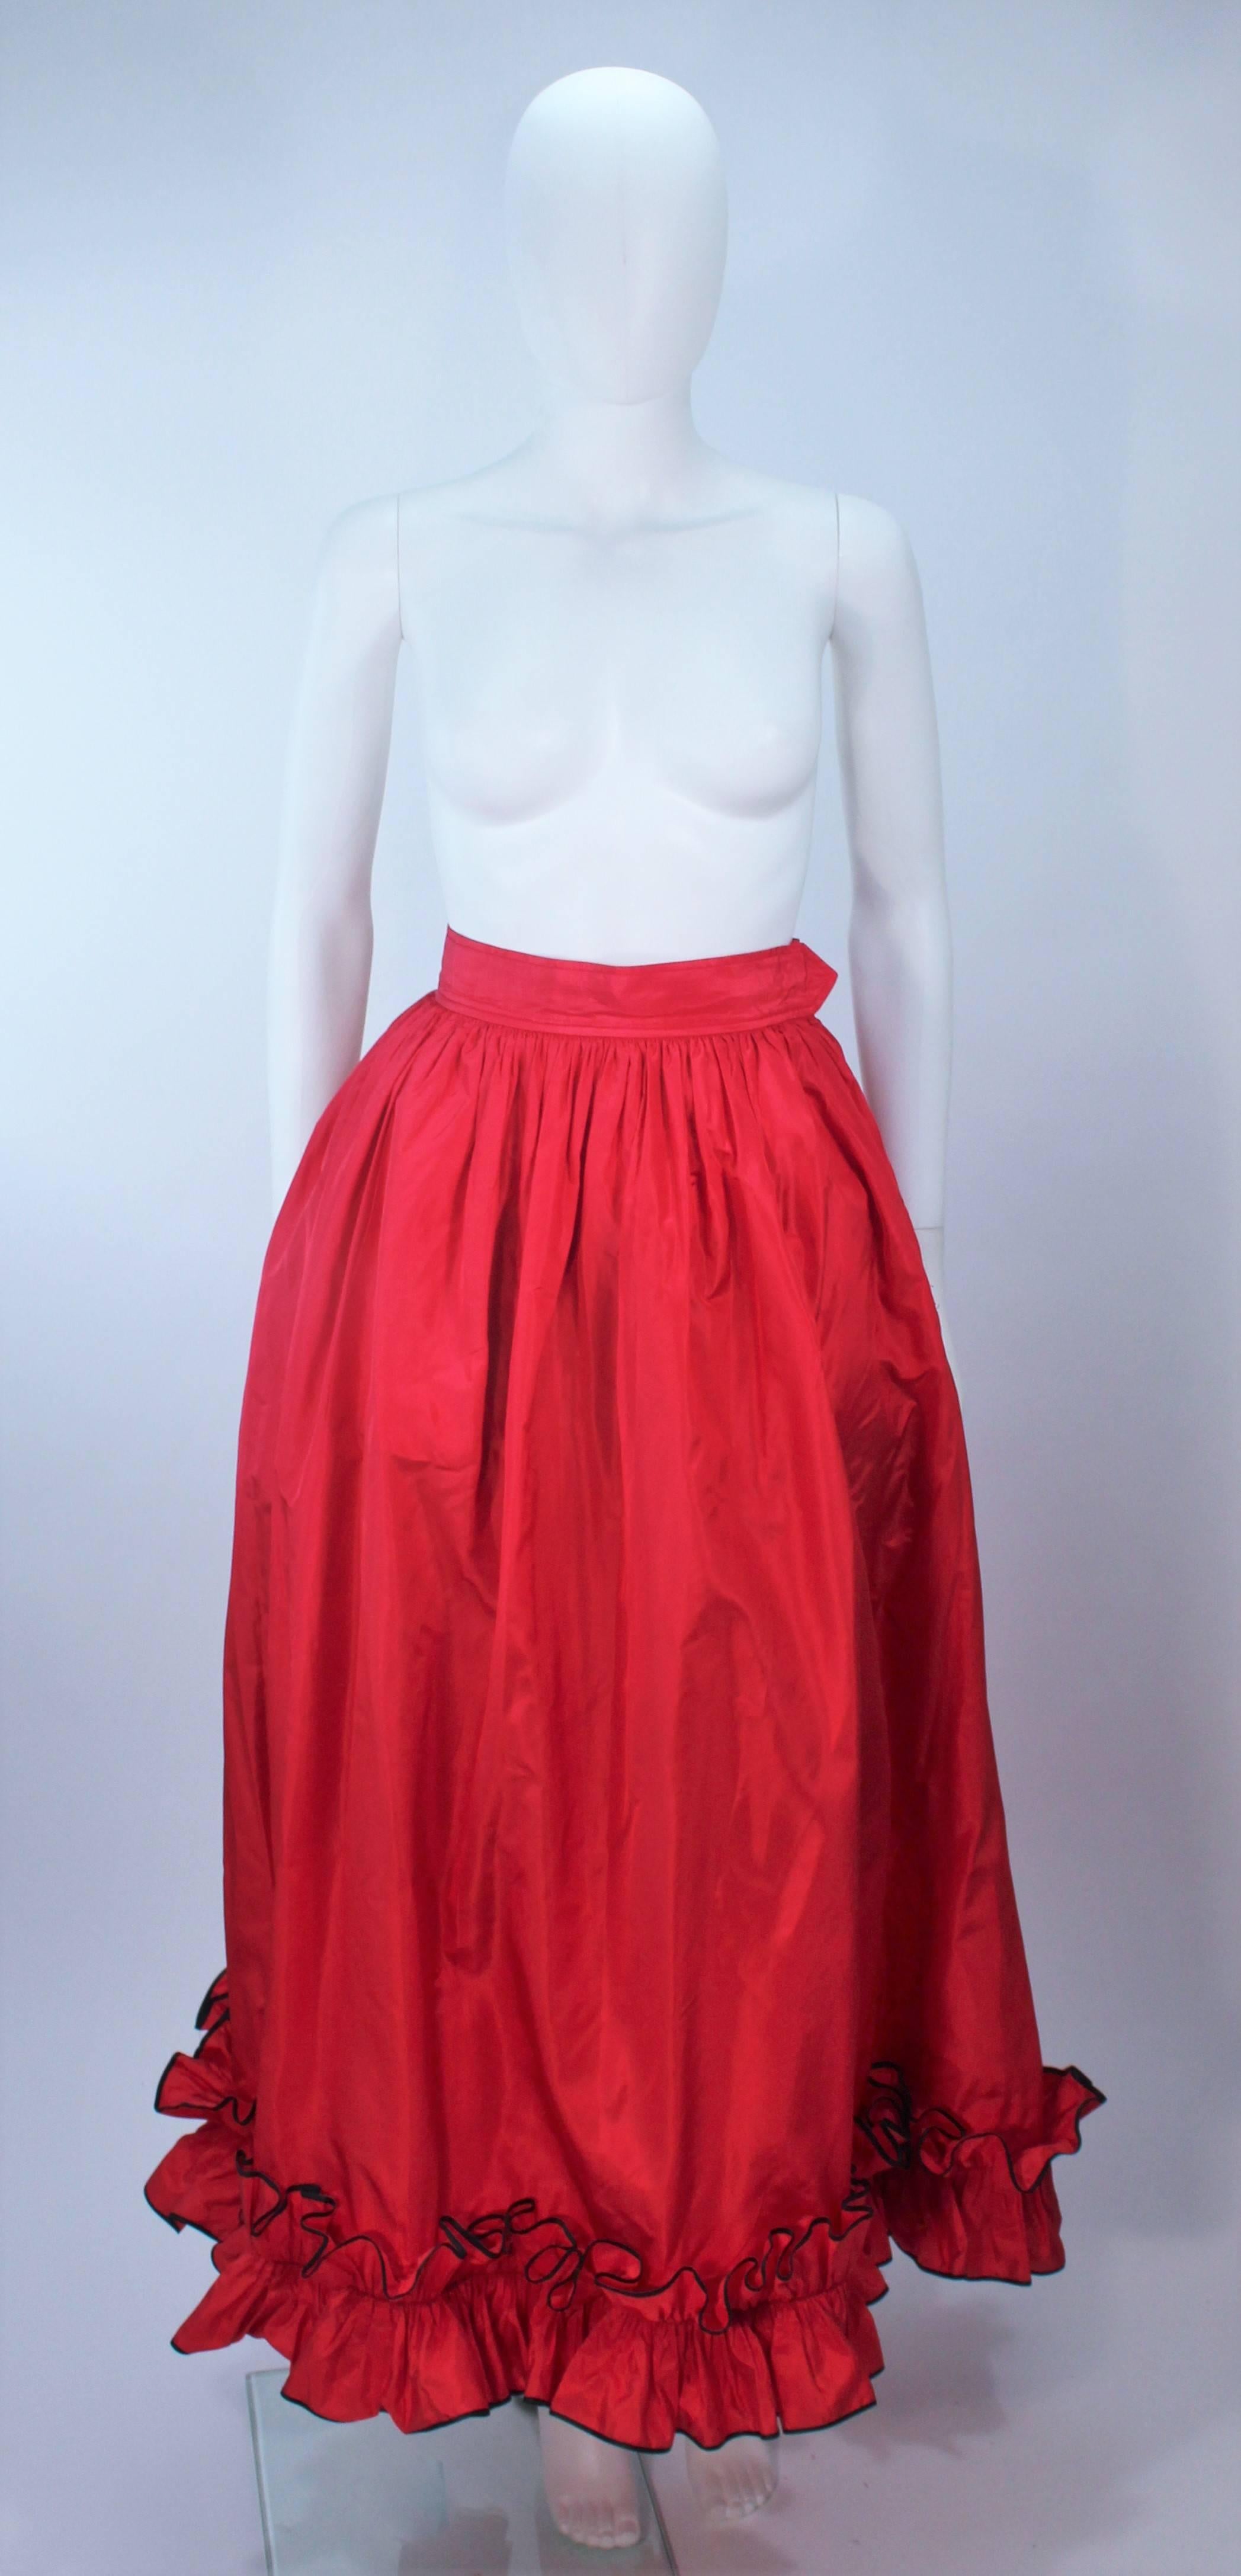 YVES SAINT LAURENT 1970's Red Satin Ruffled Ensemble with Black Trim Size 40 For Sale 4